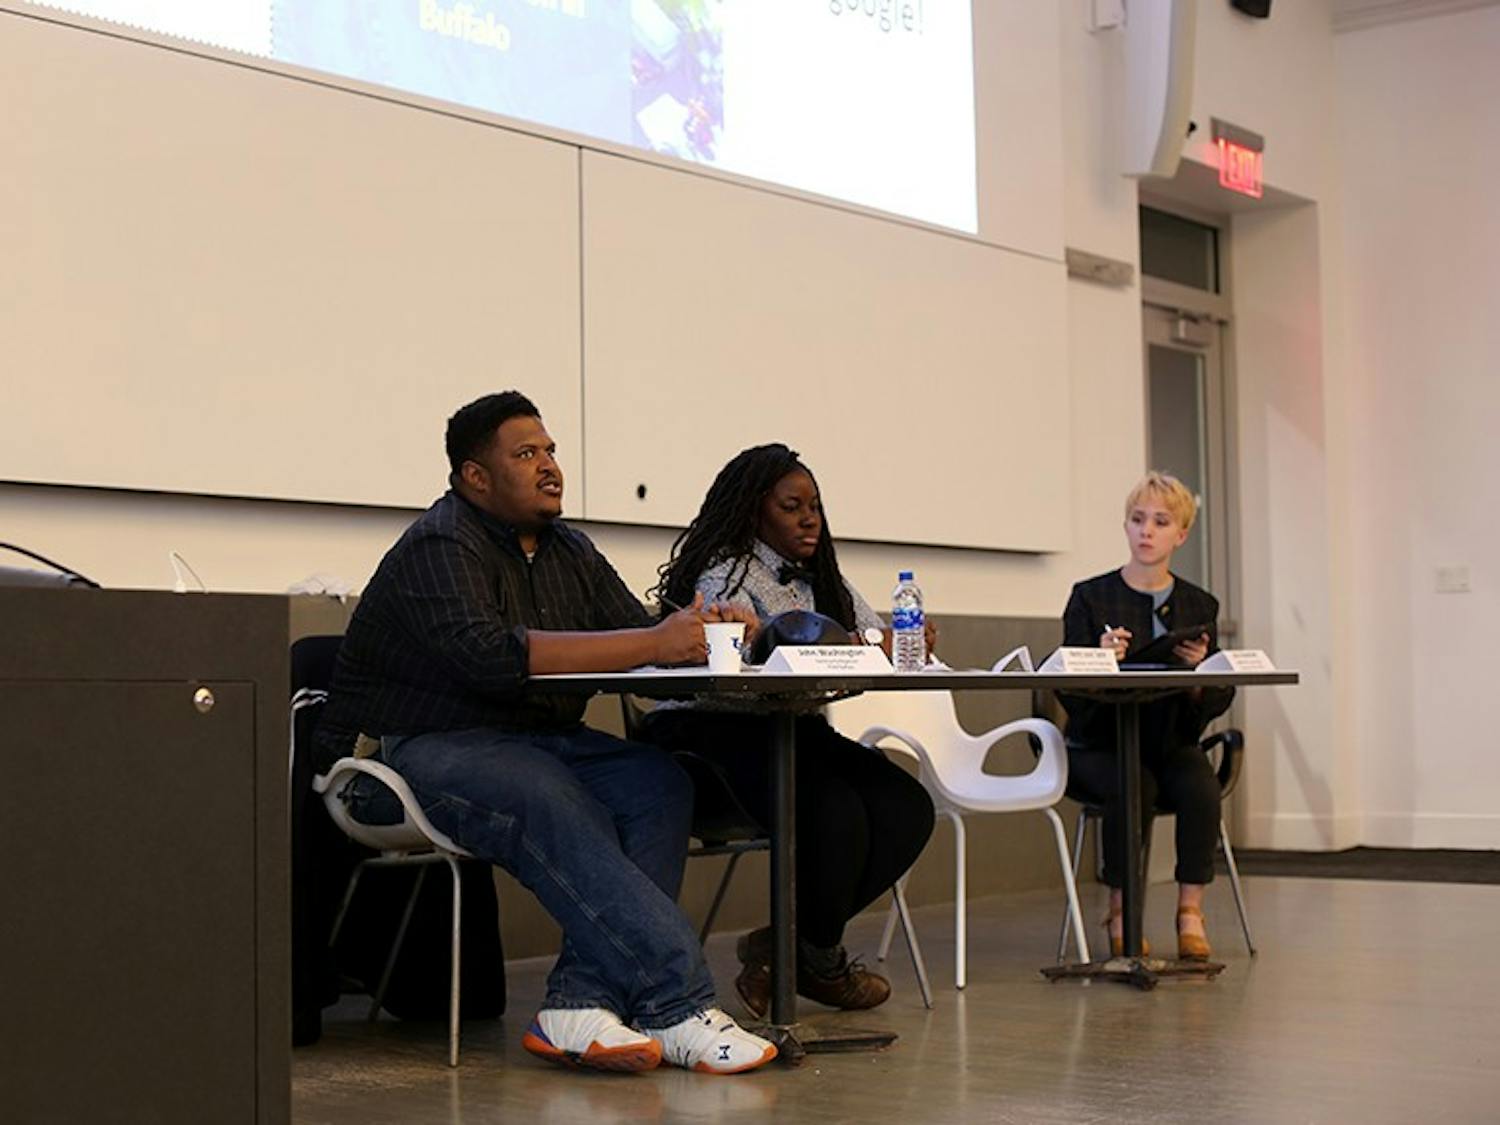 Panelists John Washington (left) and Jessica Coley (middle) discuss concerns on how the university’s three campuses are impacting Buffalo neighborhood.&nbsp;The panelists’ speeches were followed by a Q&A, where the crowd asked questions about the way the university’s campuses are impacting the surrounding neighborhoods.